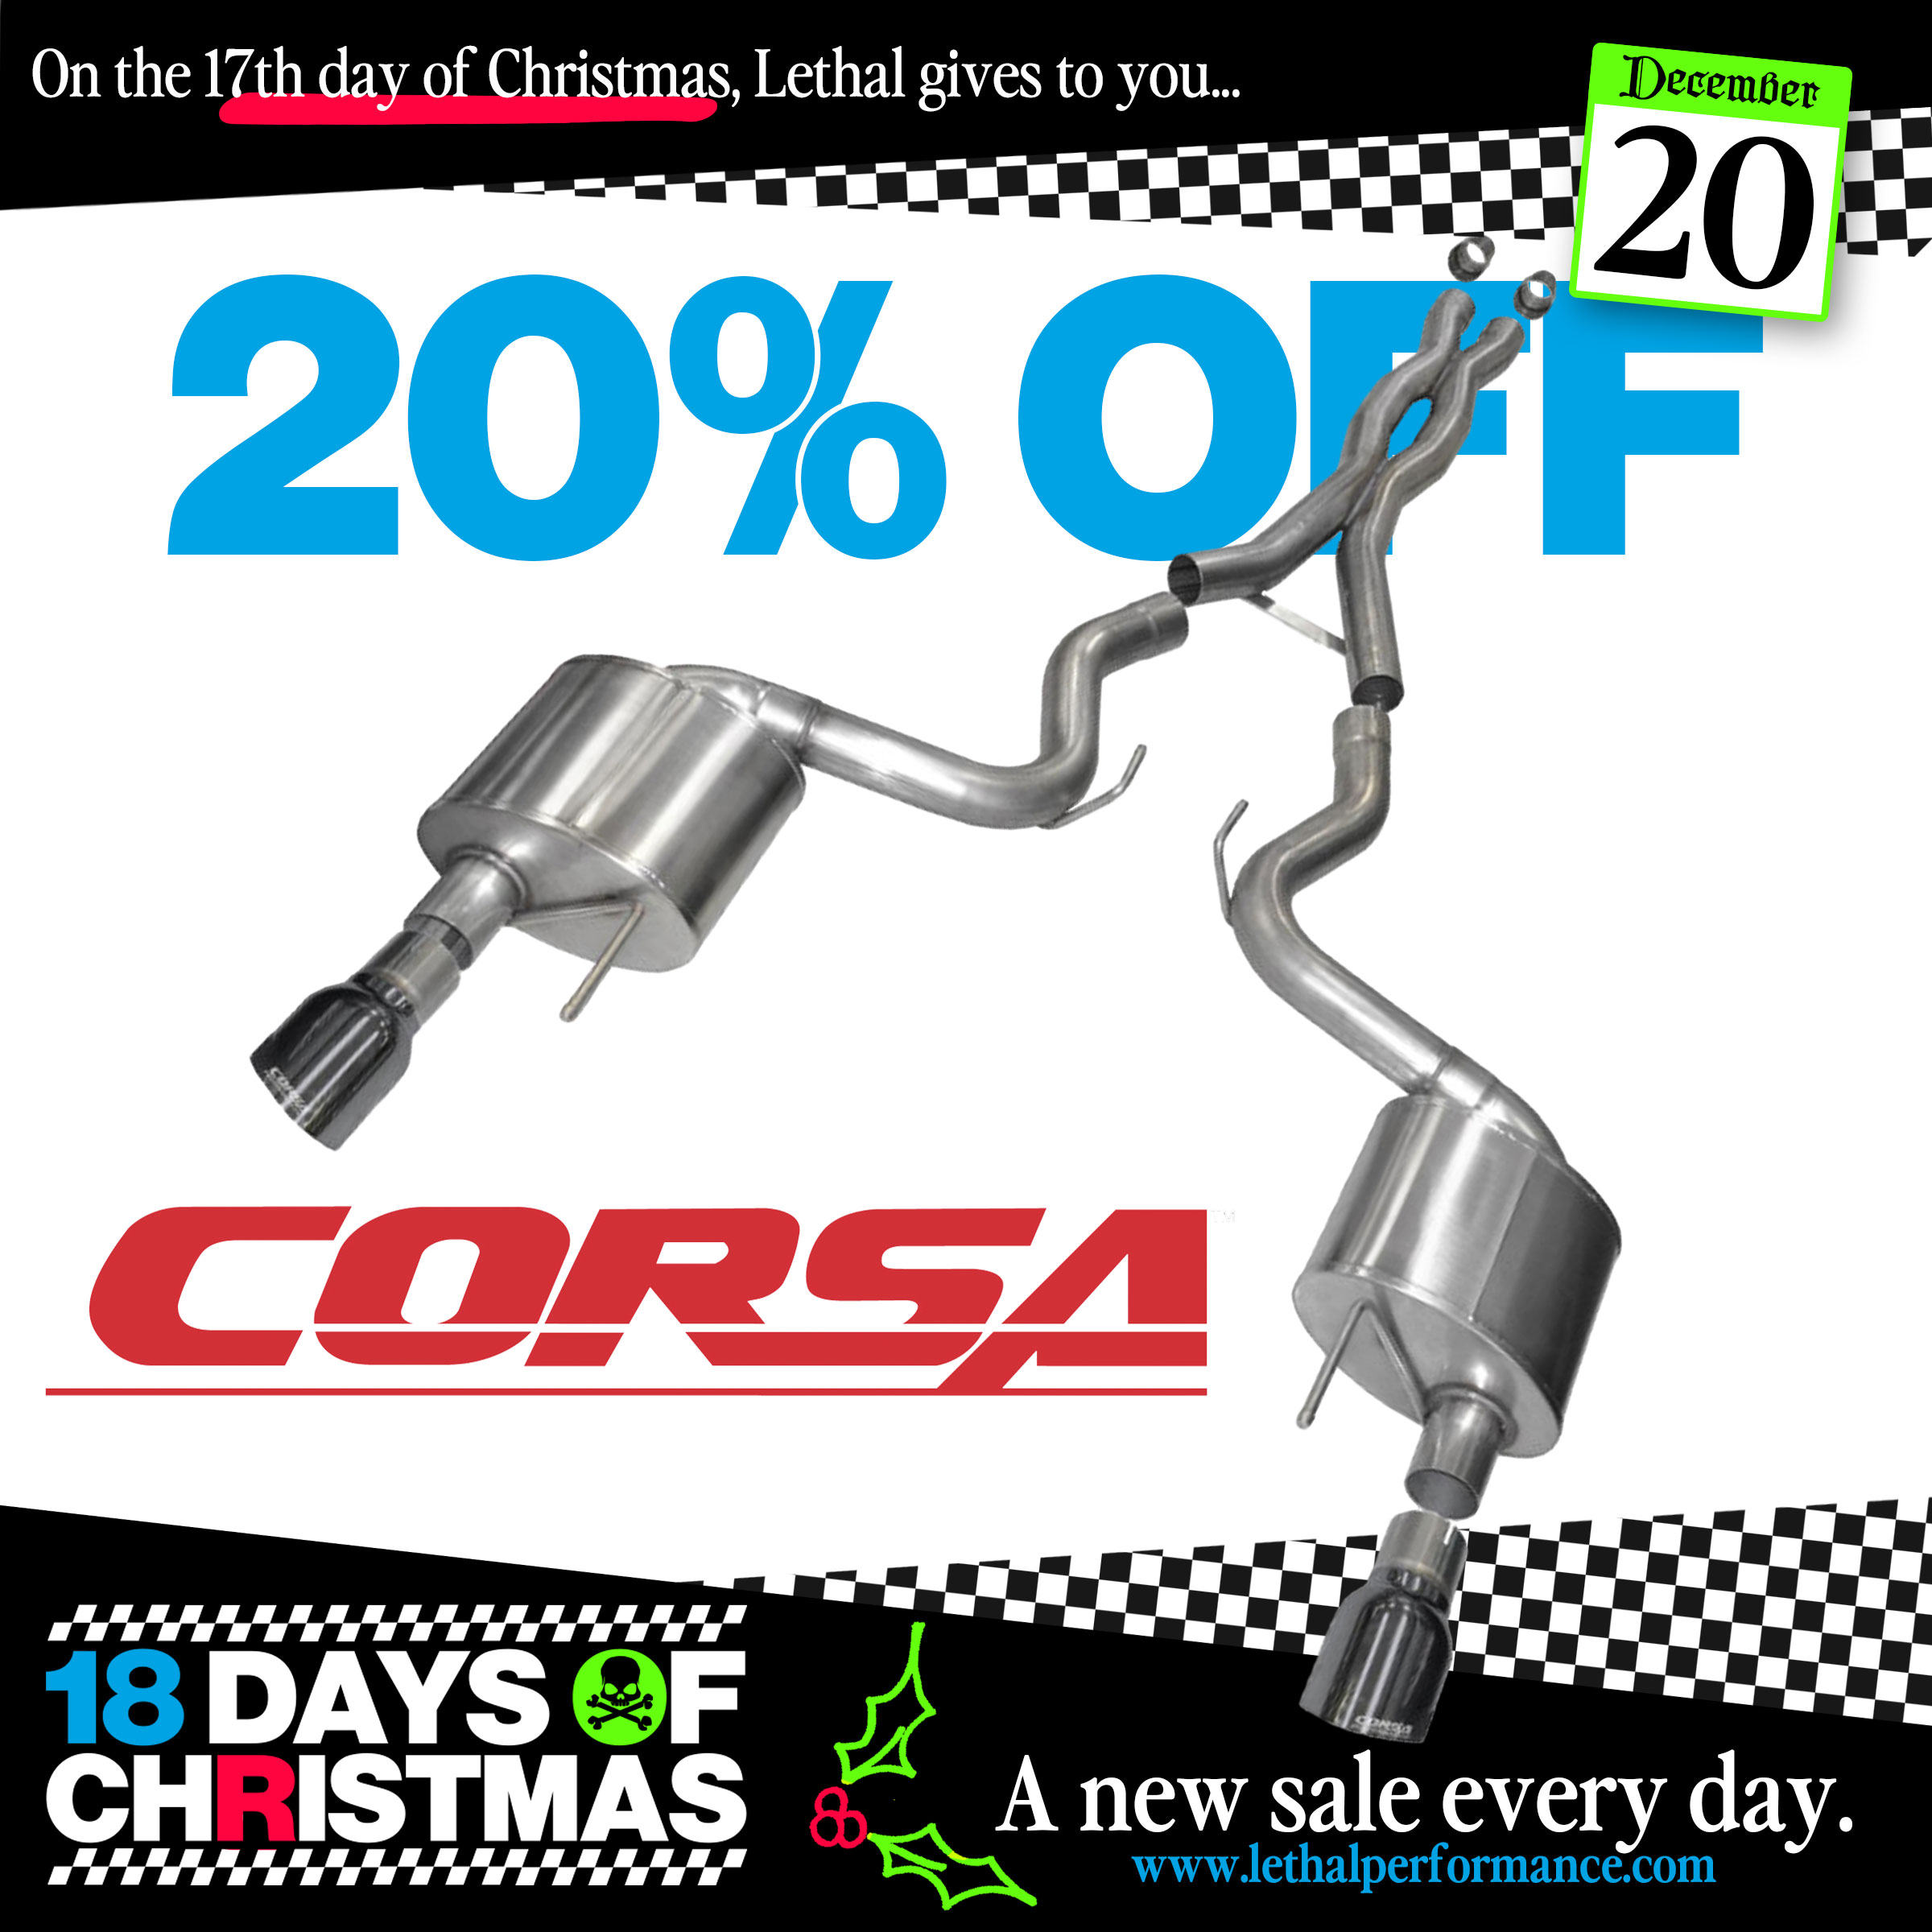 S650 Mustang Lethal Perfomance's 18 Days of Christmas SALES START NOW!! Corsa_Main (1)